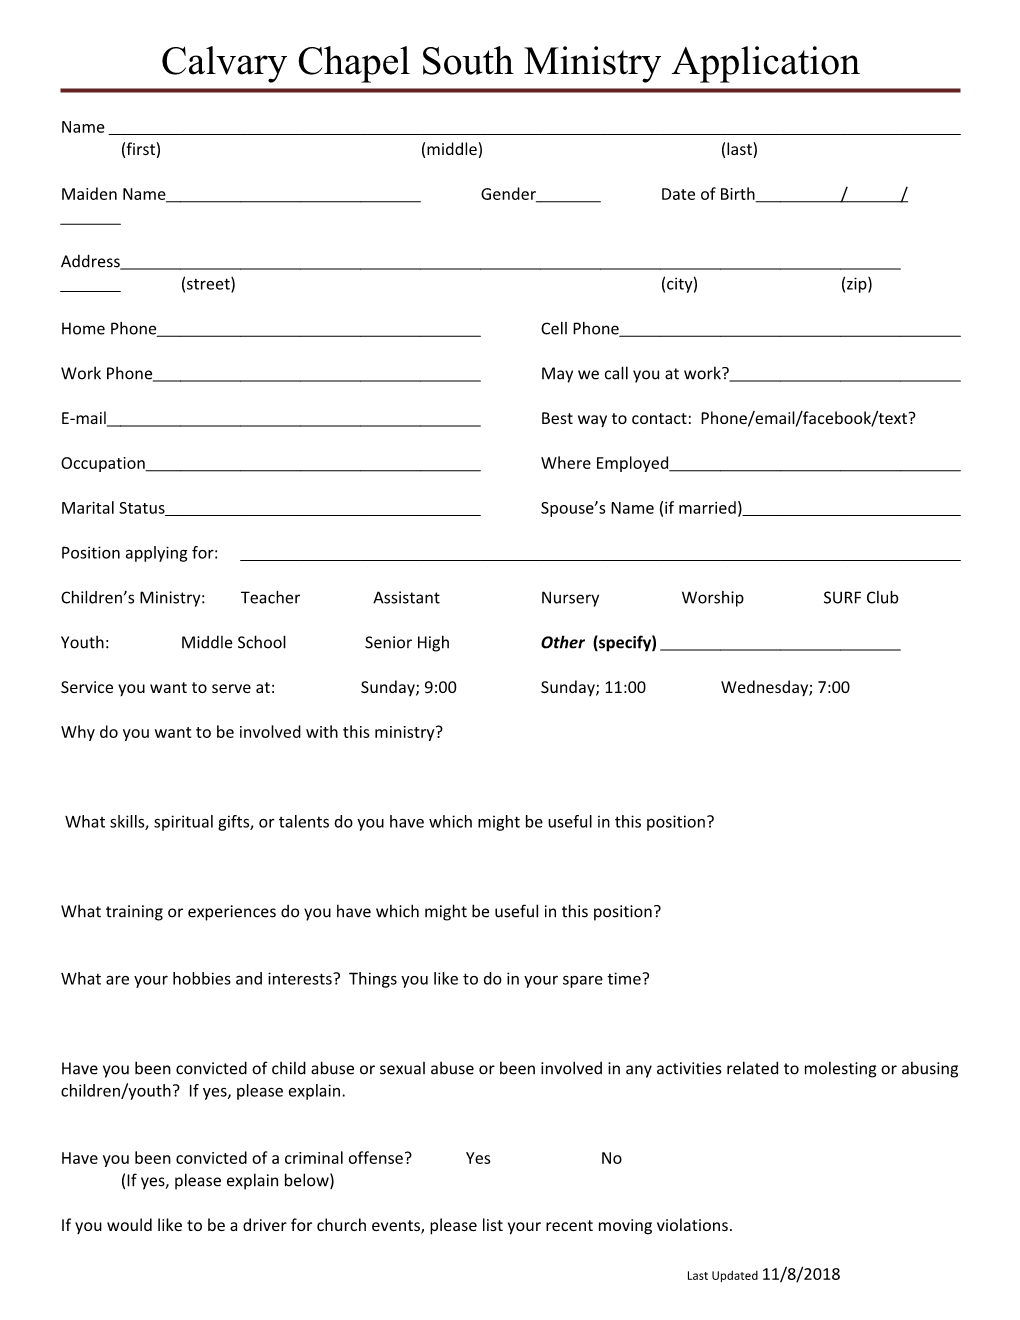 Calvary Chapel South Ministry Application